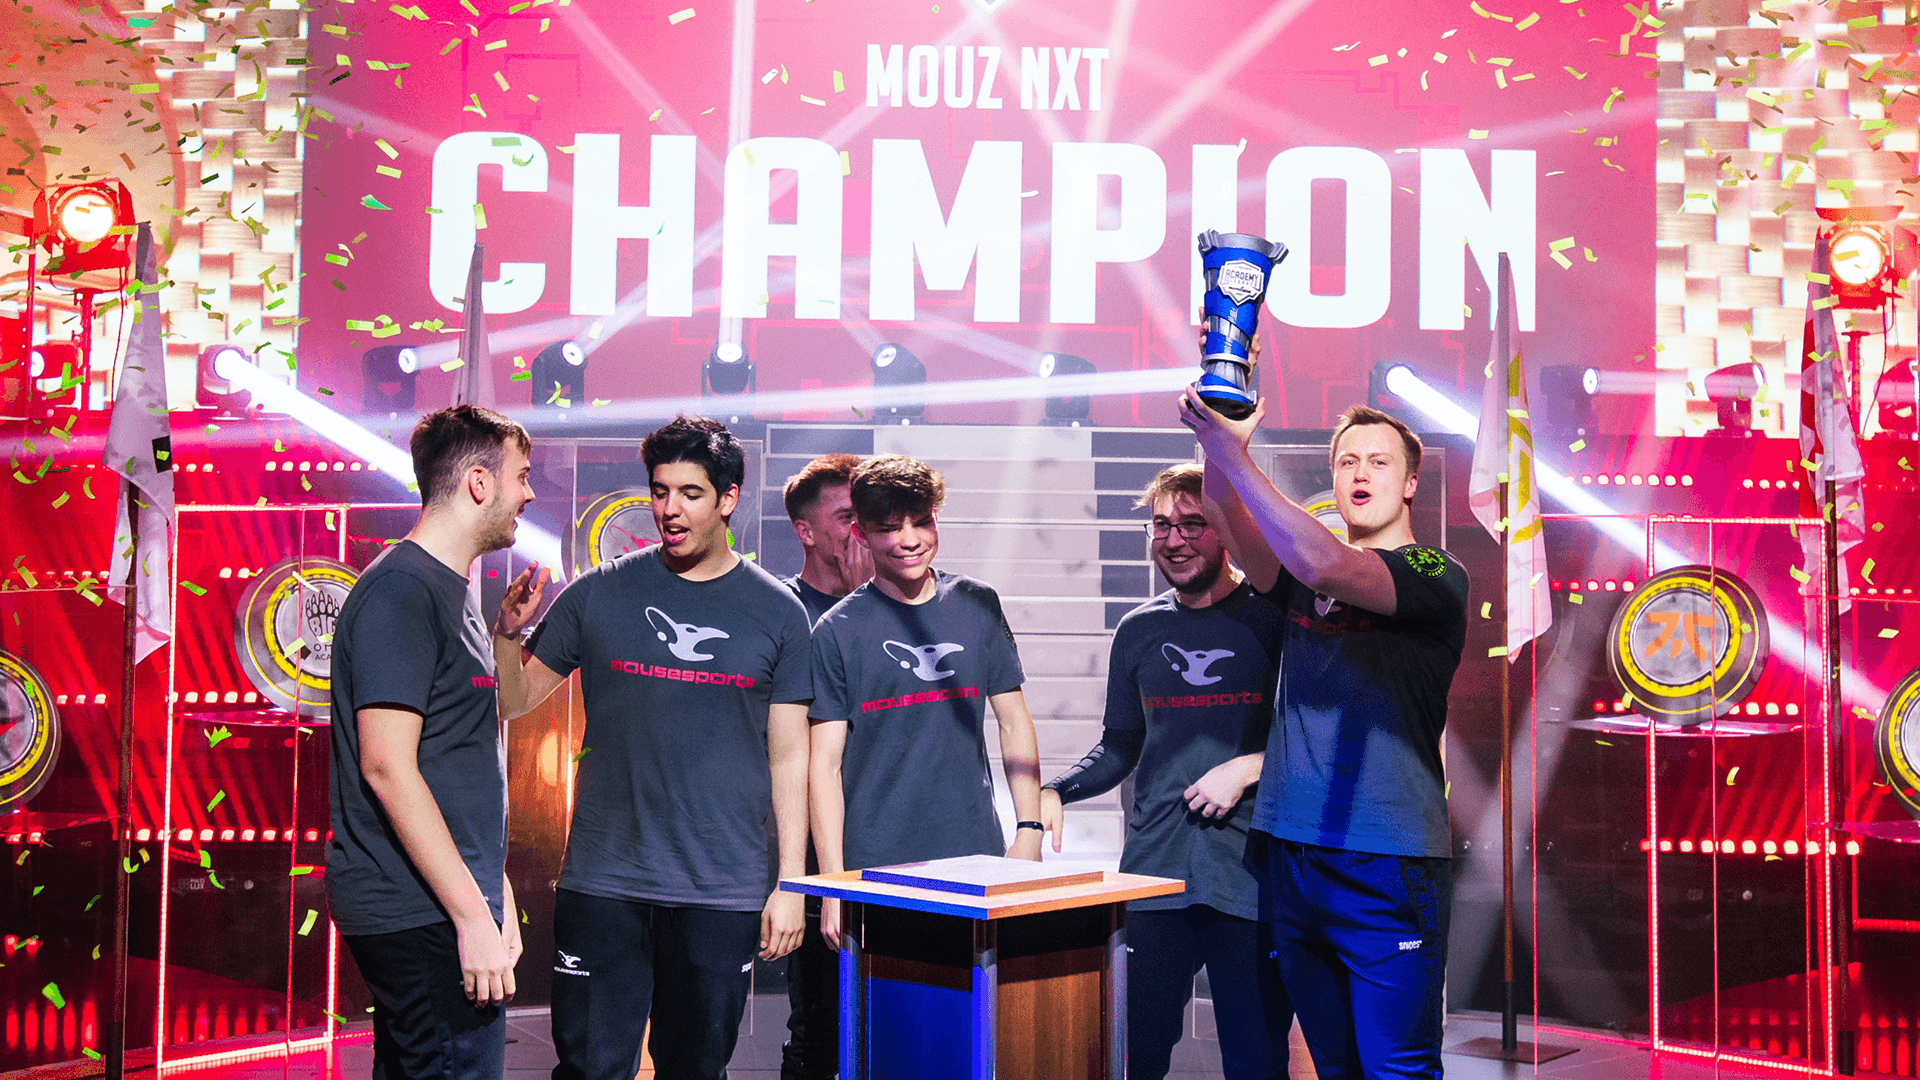 mousesports down to three